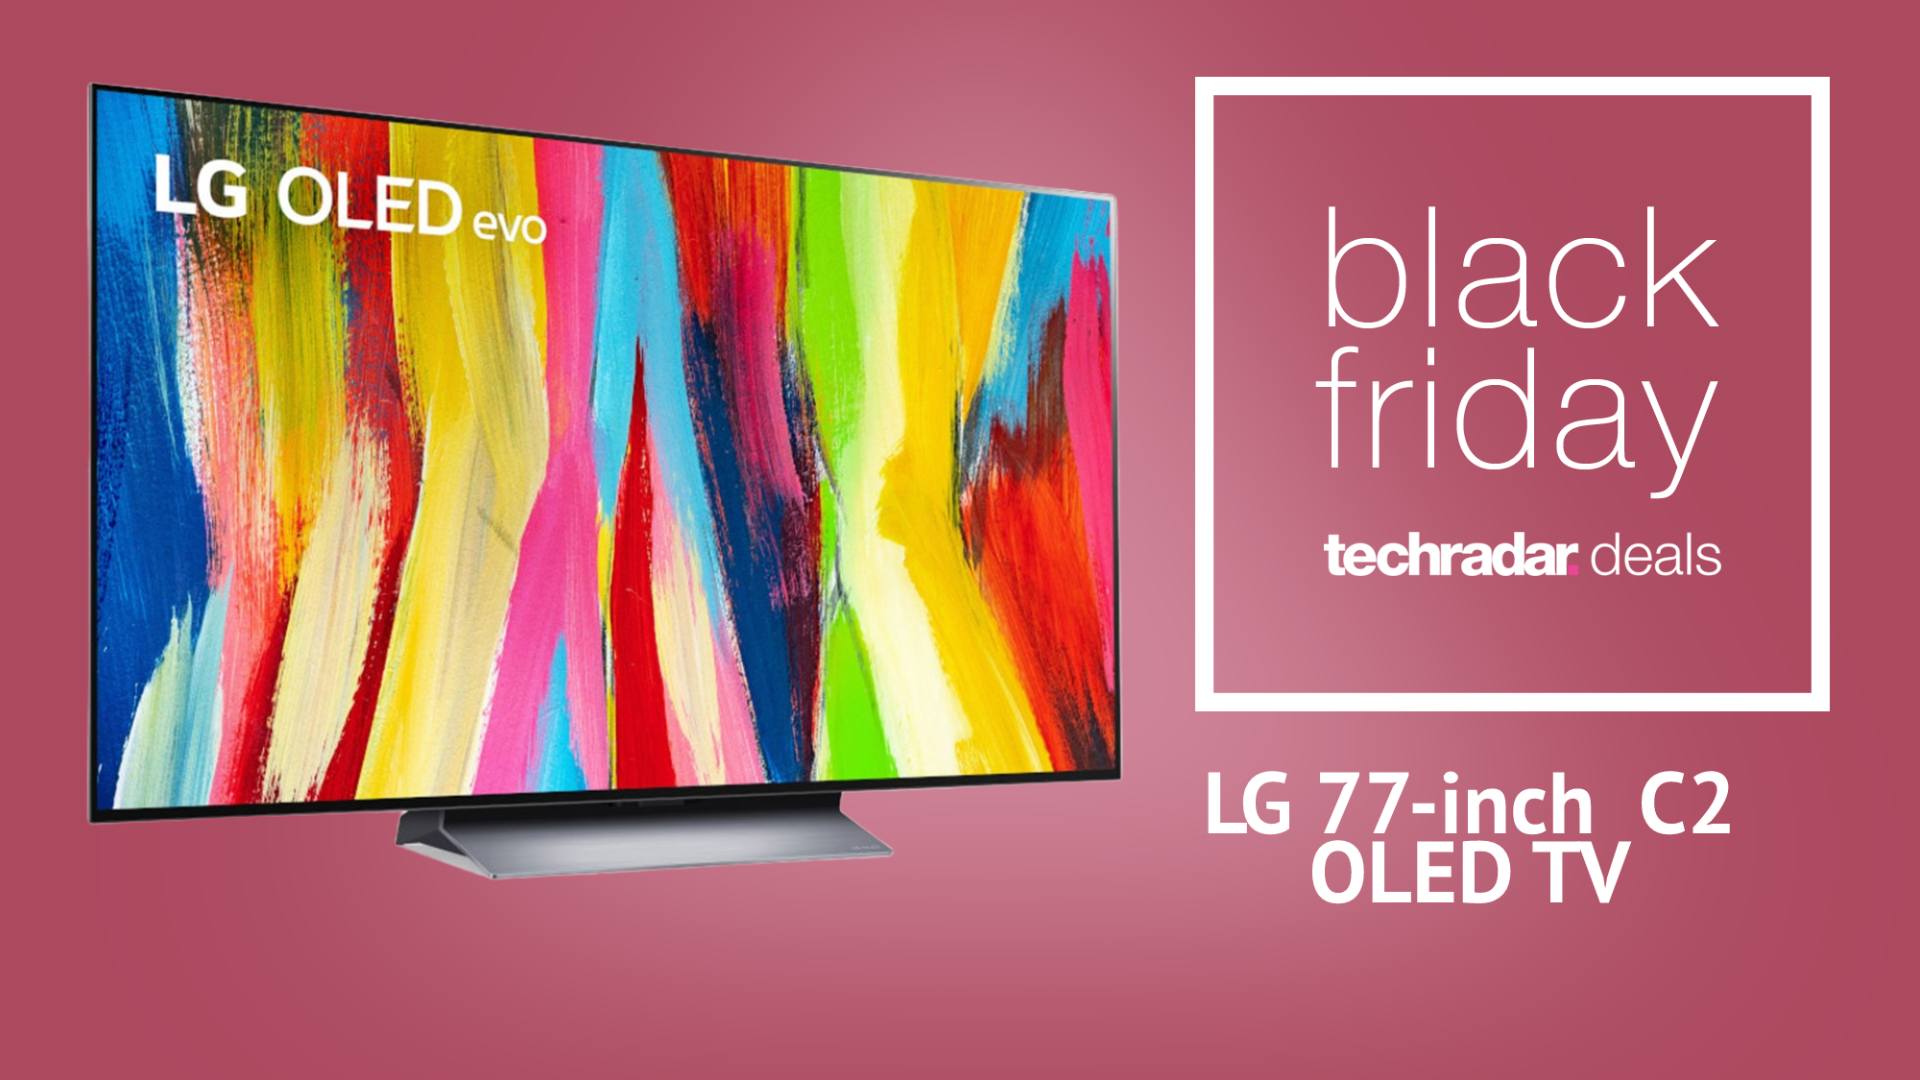 LG's 77-inch C2 OLED TV is $800 off with this Black Friday deal | TechRadar